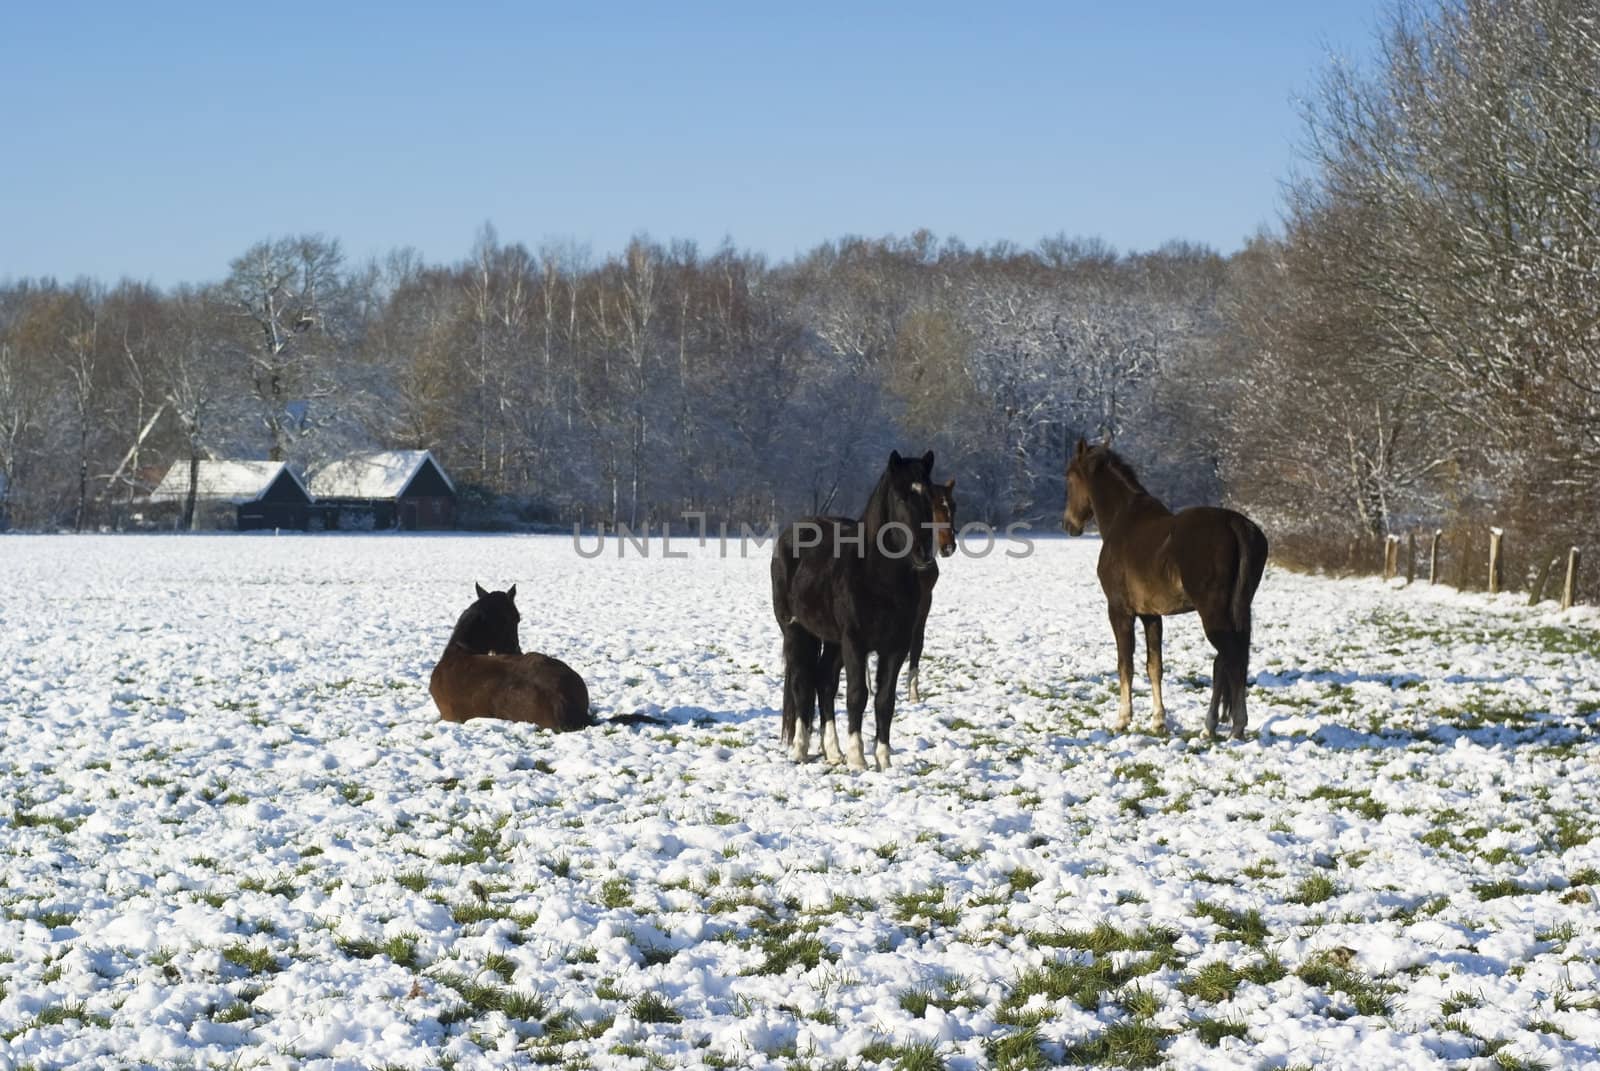 Couple of horses standing in a snowy meadow.